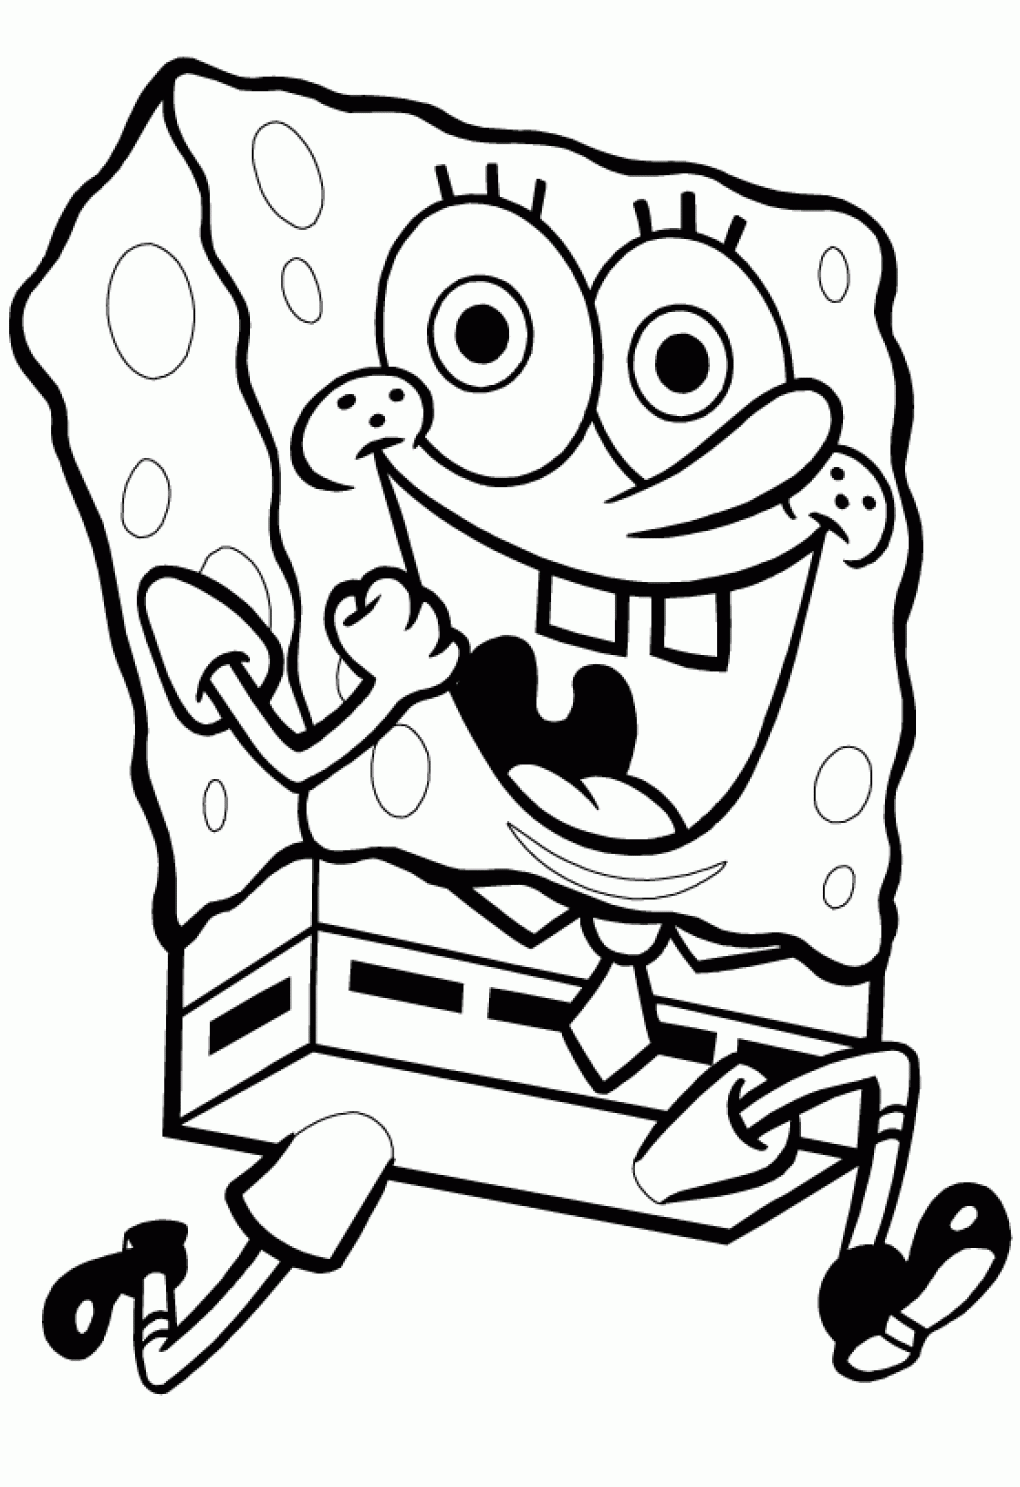 Printable Spongebob Coloring Pages - Customize and Print